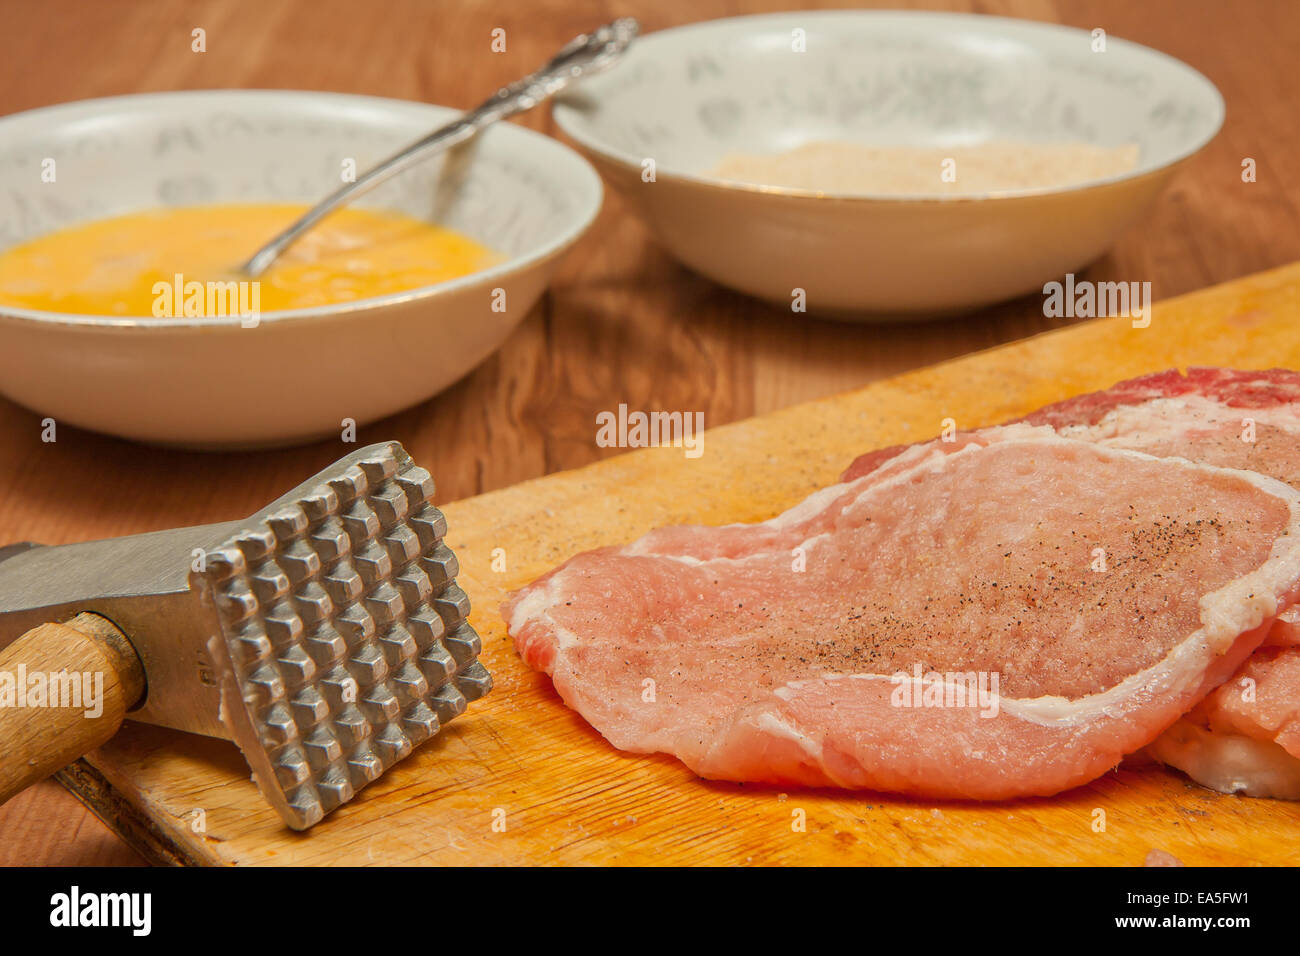 Pork chops ready to be fried. Stock Photo